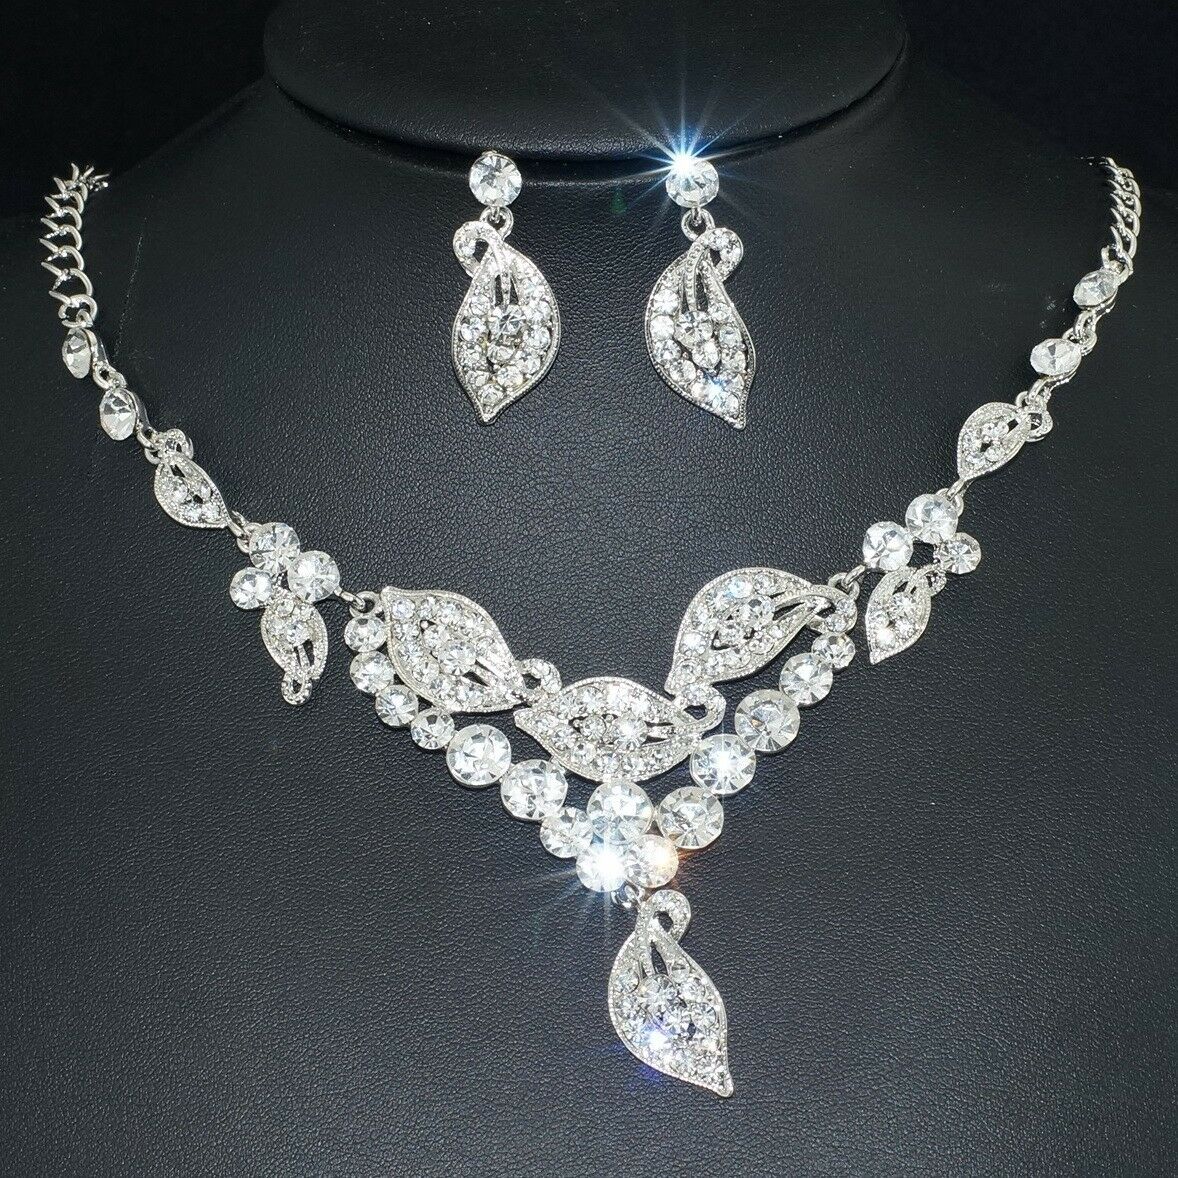 Yt289 Clear Rhinestone Crystal Earrings Necklace Set Bridal Party Gift